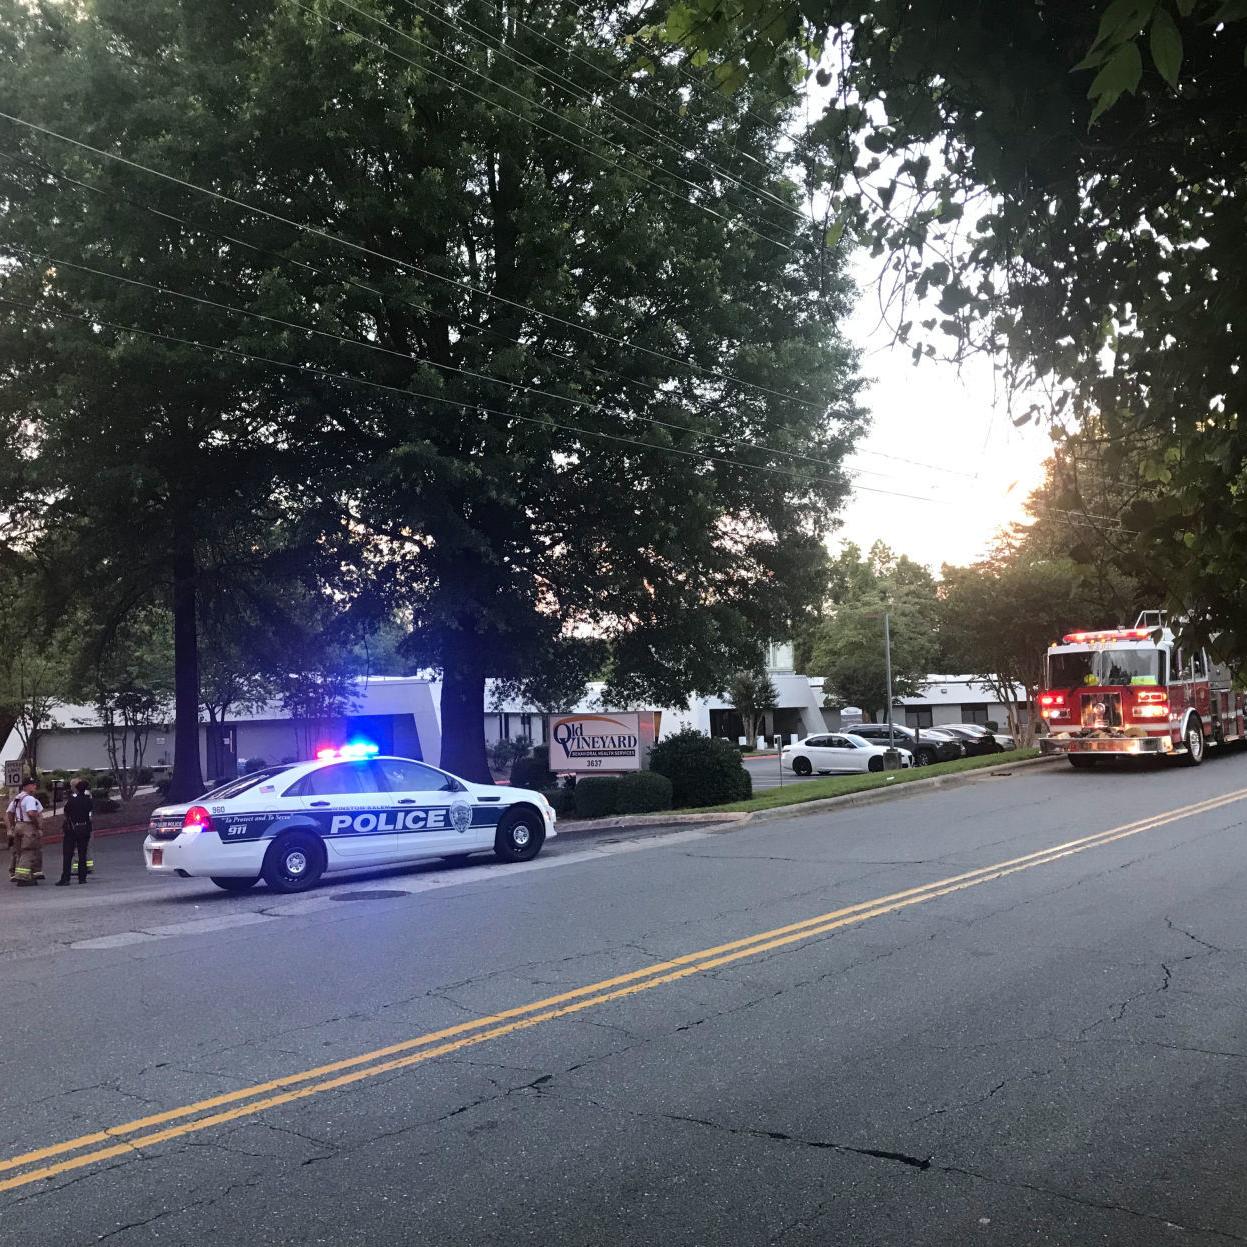 Disturbance Ends Peacefully At Old Vineyard Behavioral Health Services Local News Journalnowcom